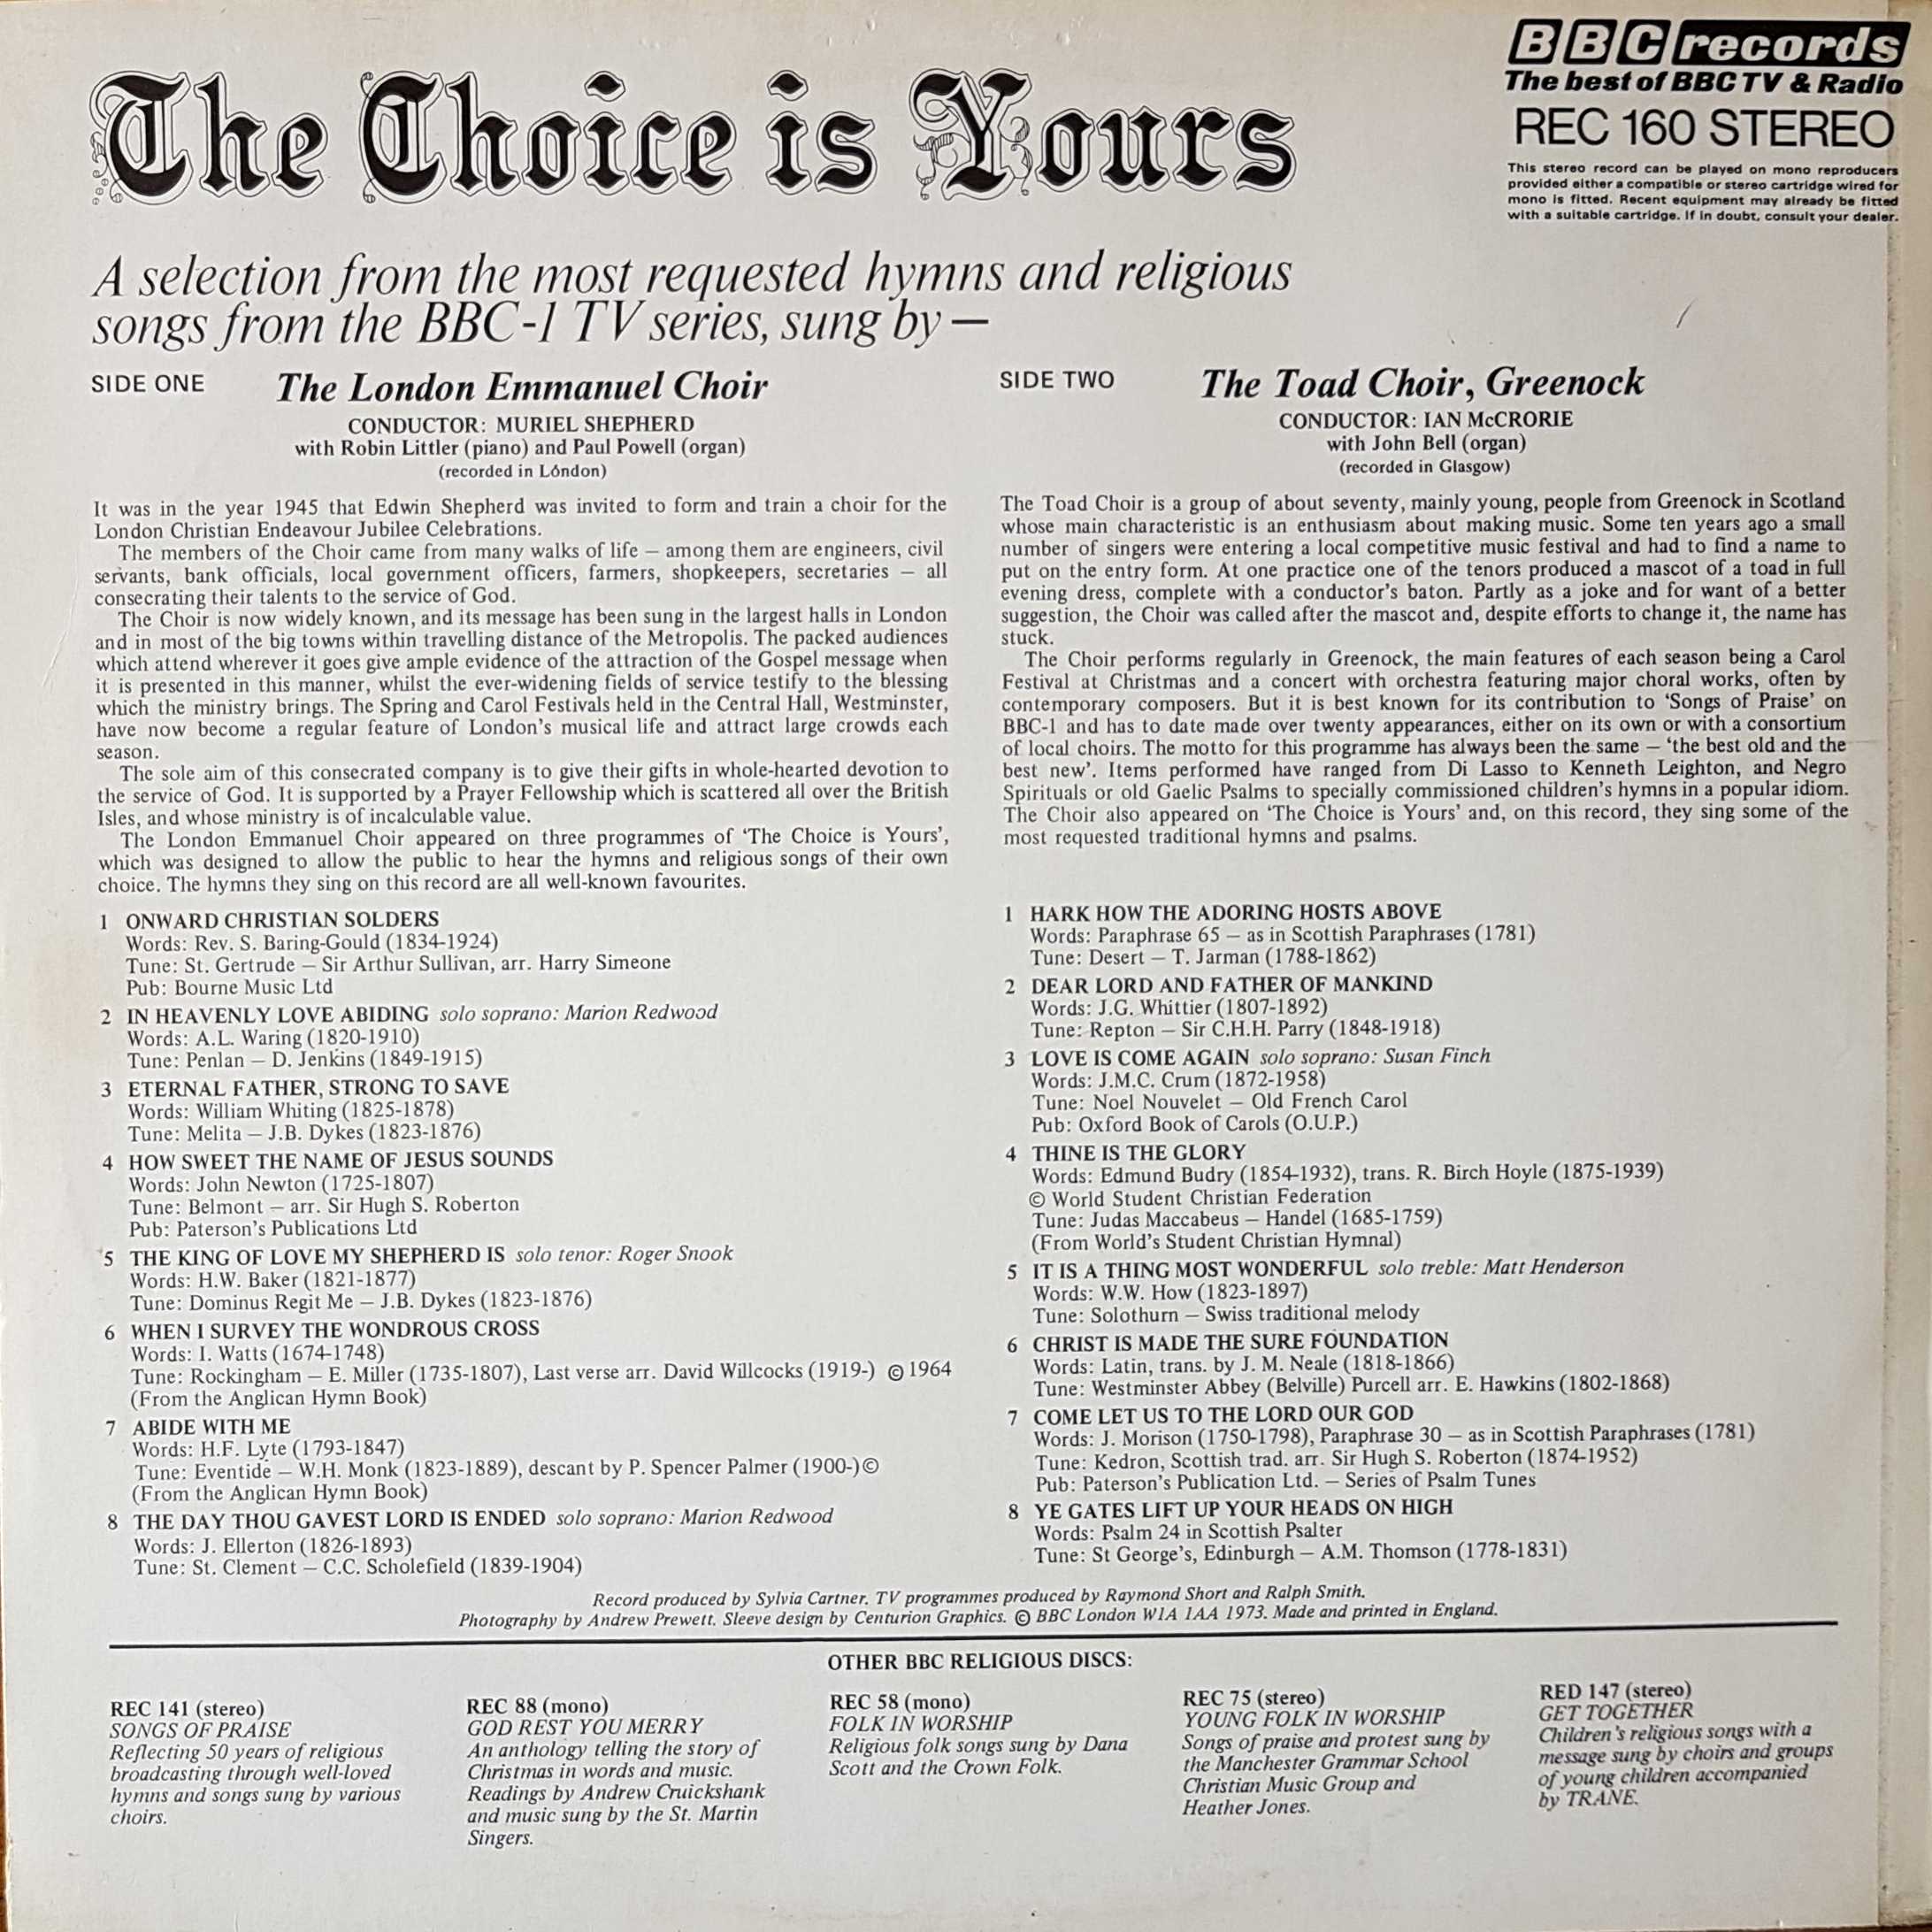 Picture of REC 160 The choice is yours by artist Various from the BBC records and Tapes library